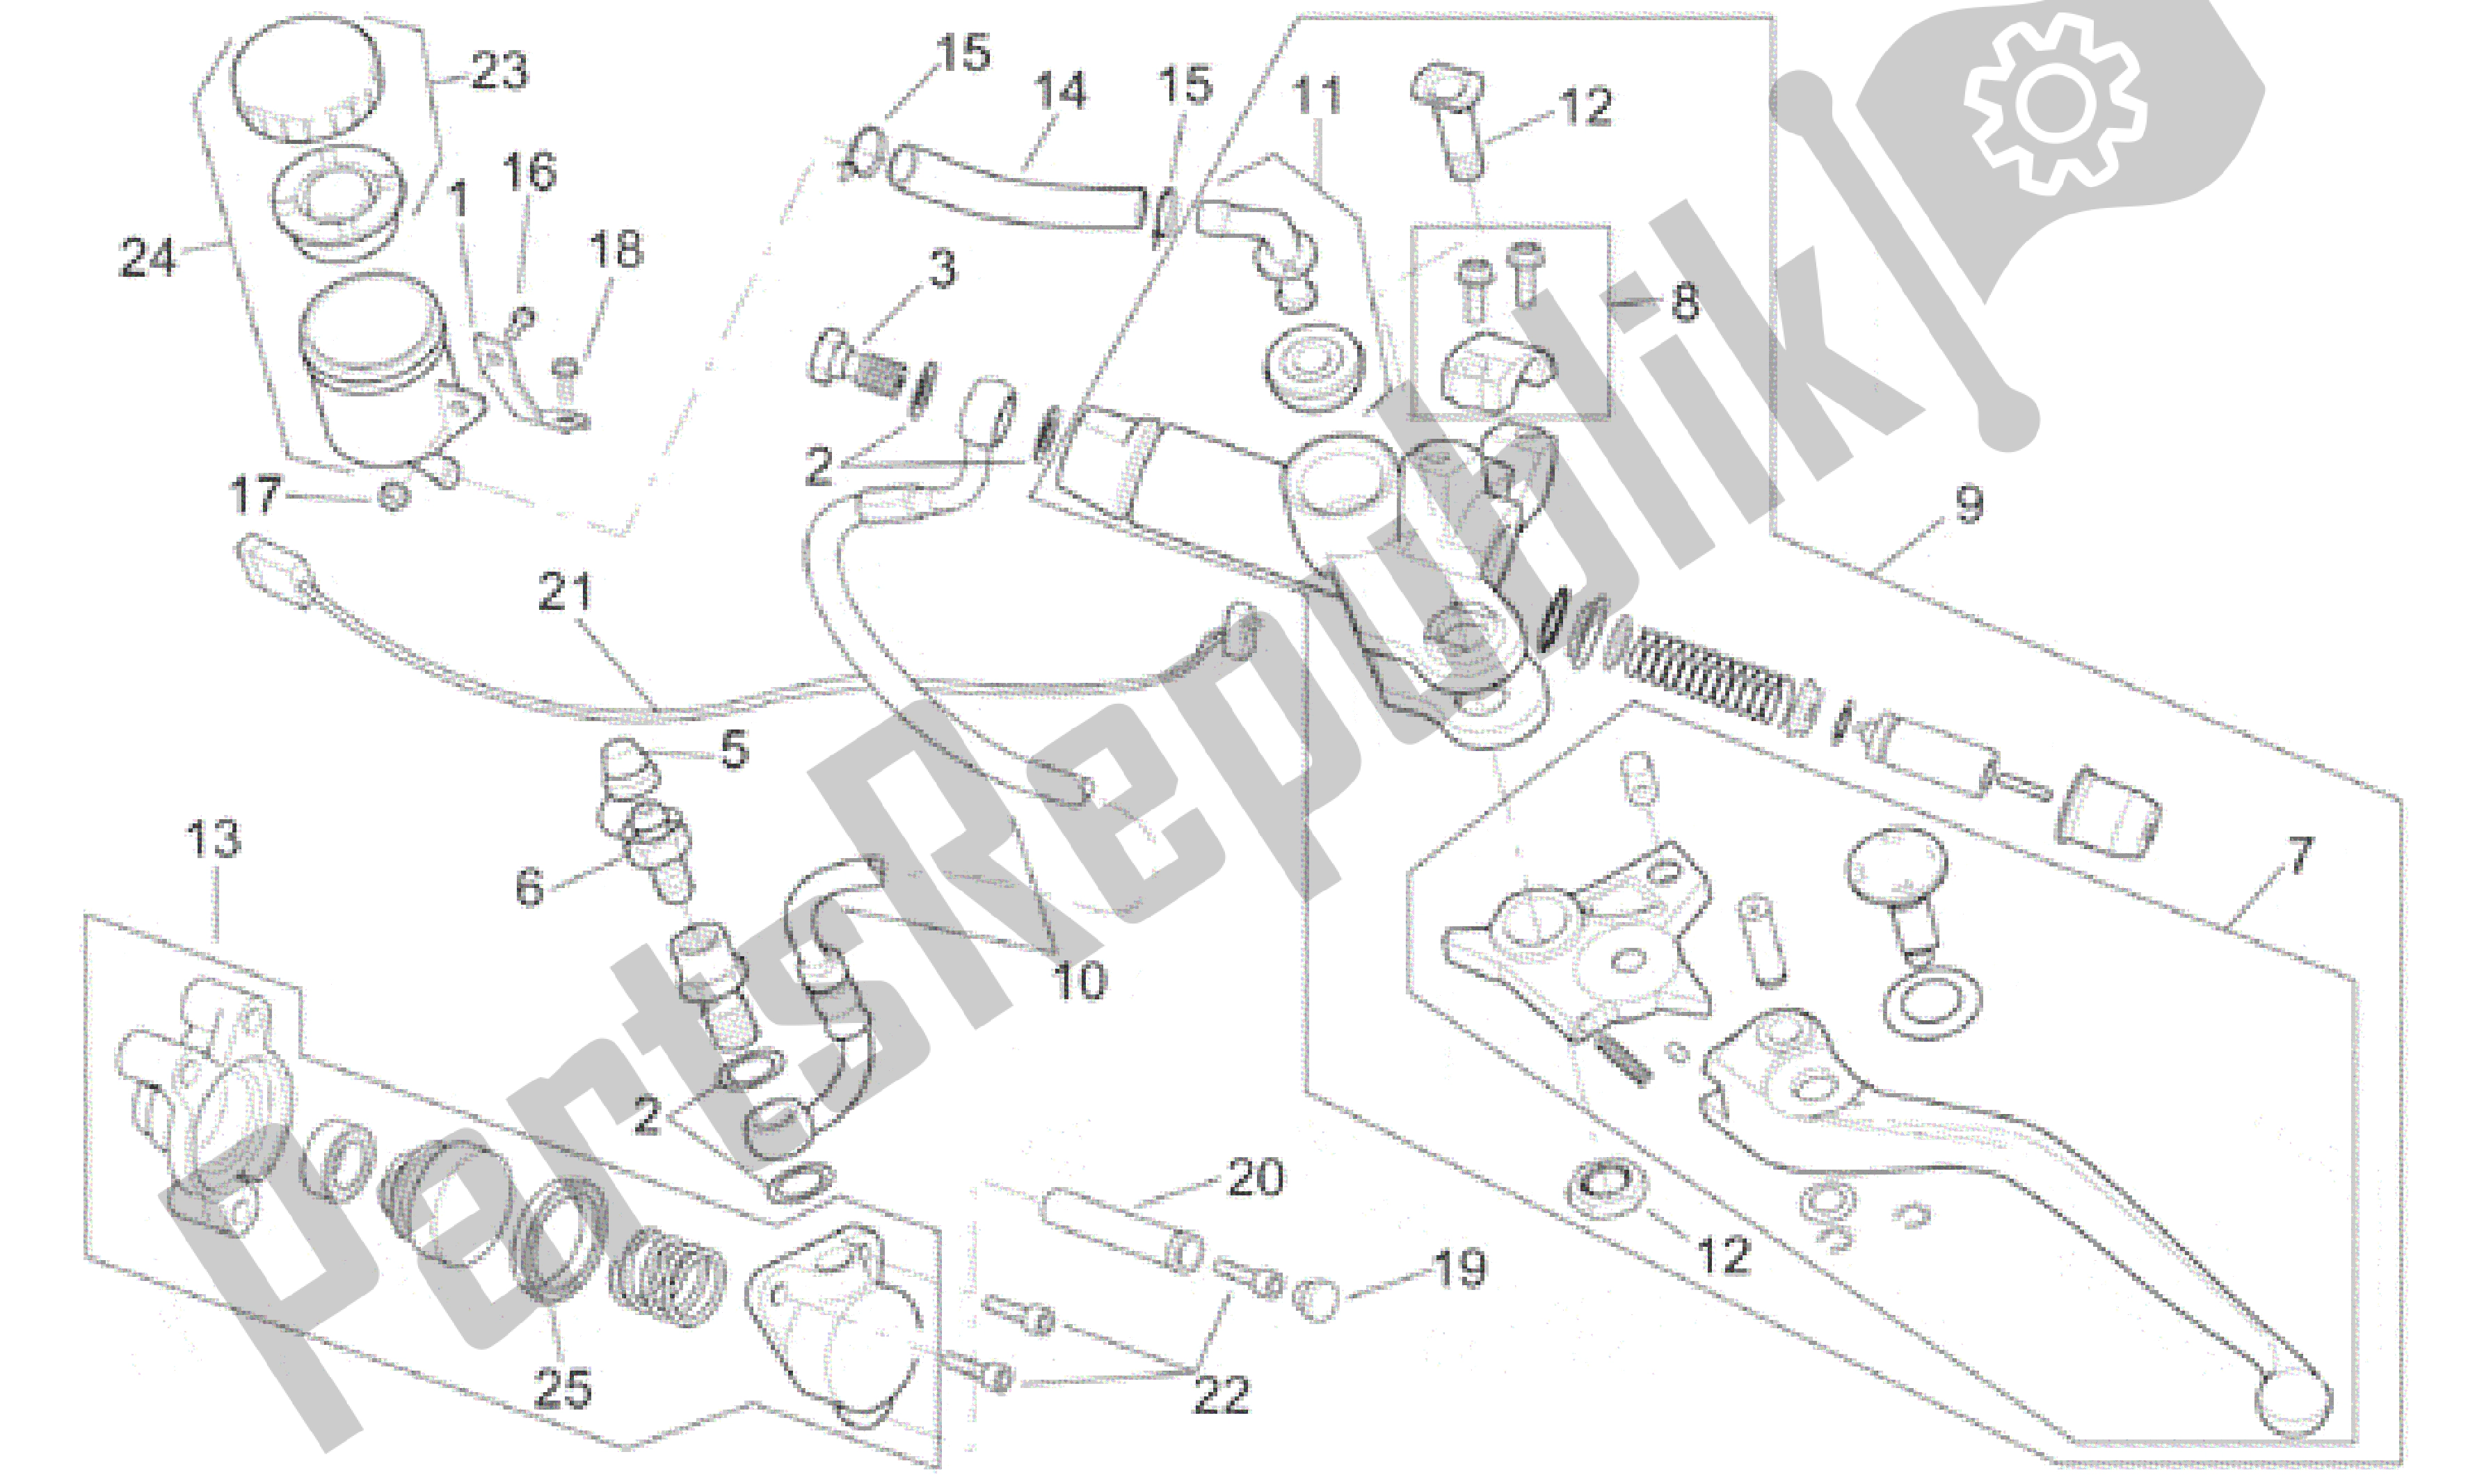 All parts for the Clutch Pump of the Aprilia RSV Mille SP 391 X 1000 1999 - 2000